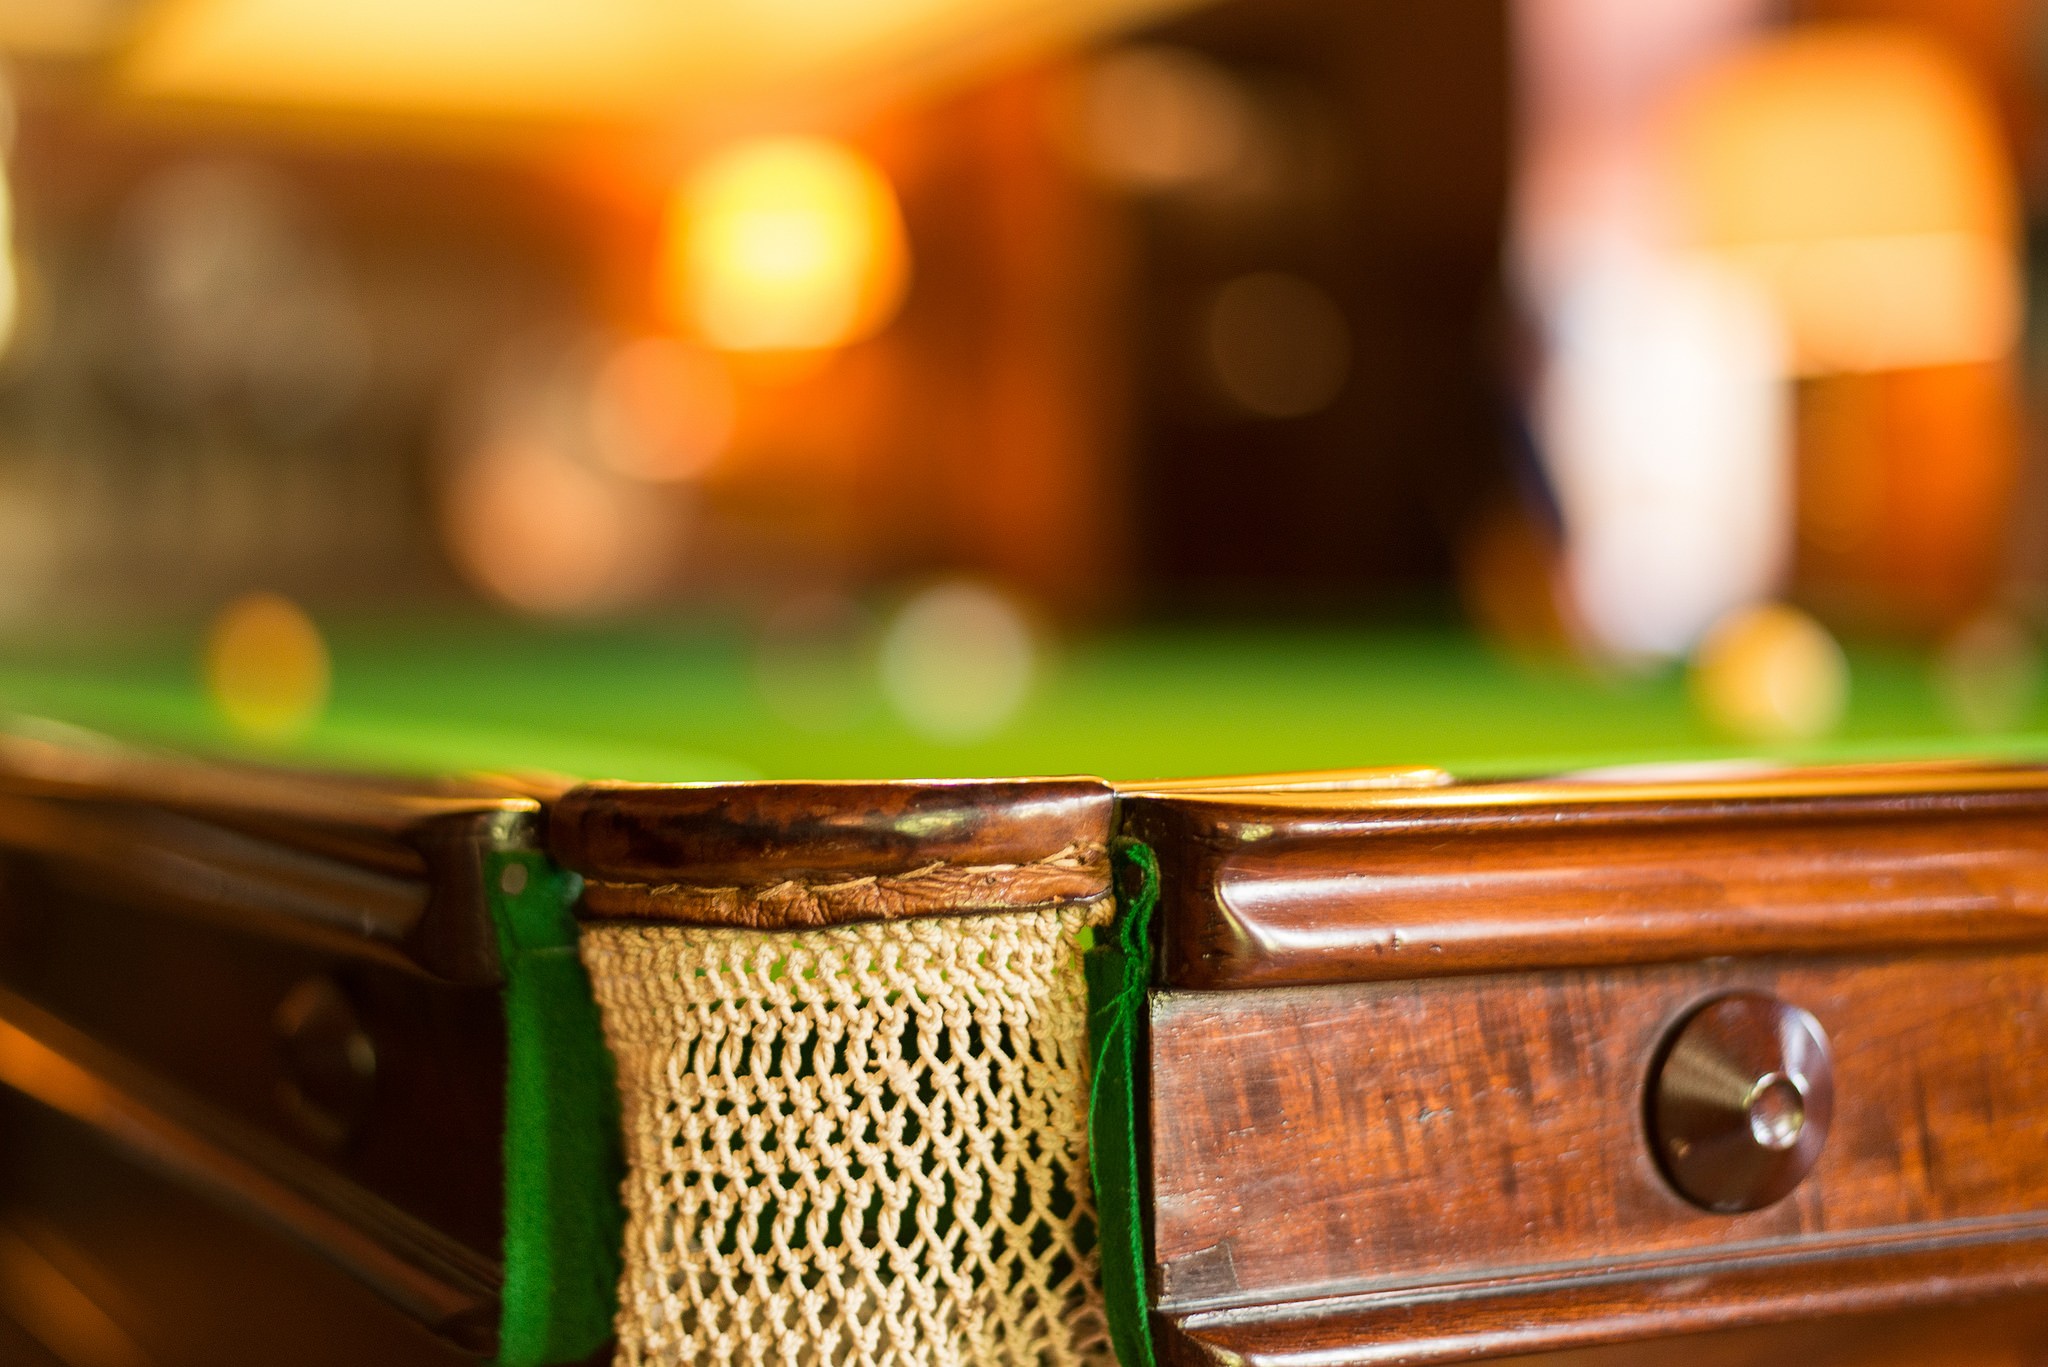 General 2048x1367 bokeh blurred depth of field sport Snooker table wood pool table baskets ball indoors cloth closeup